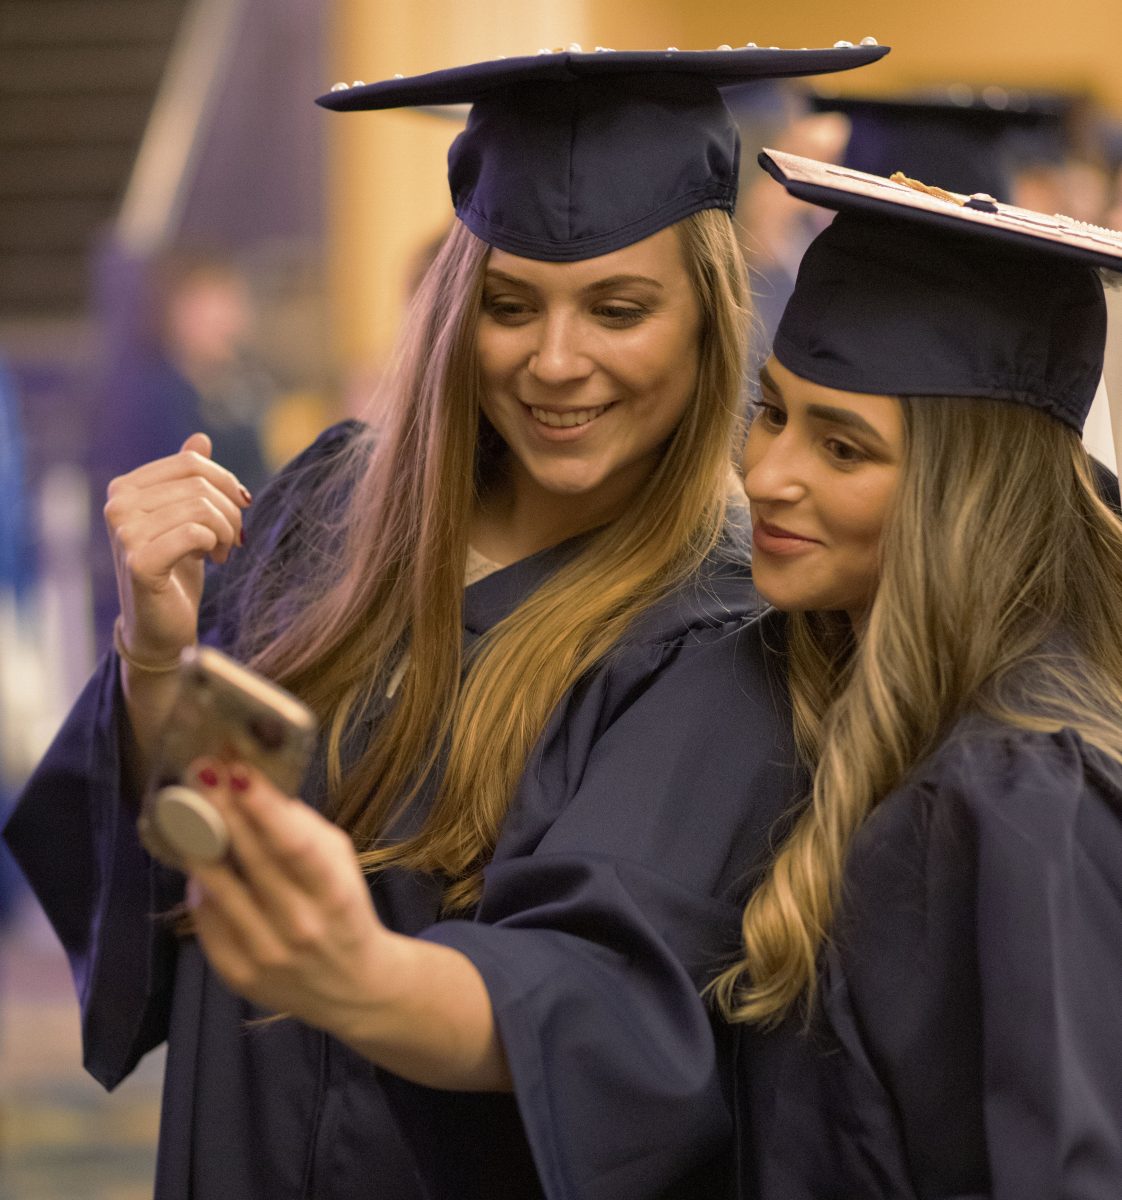 Two CEIN graduates take a selfie after their graduation ceremony.